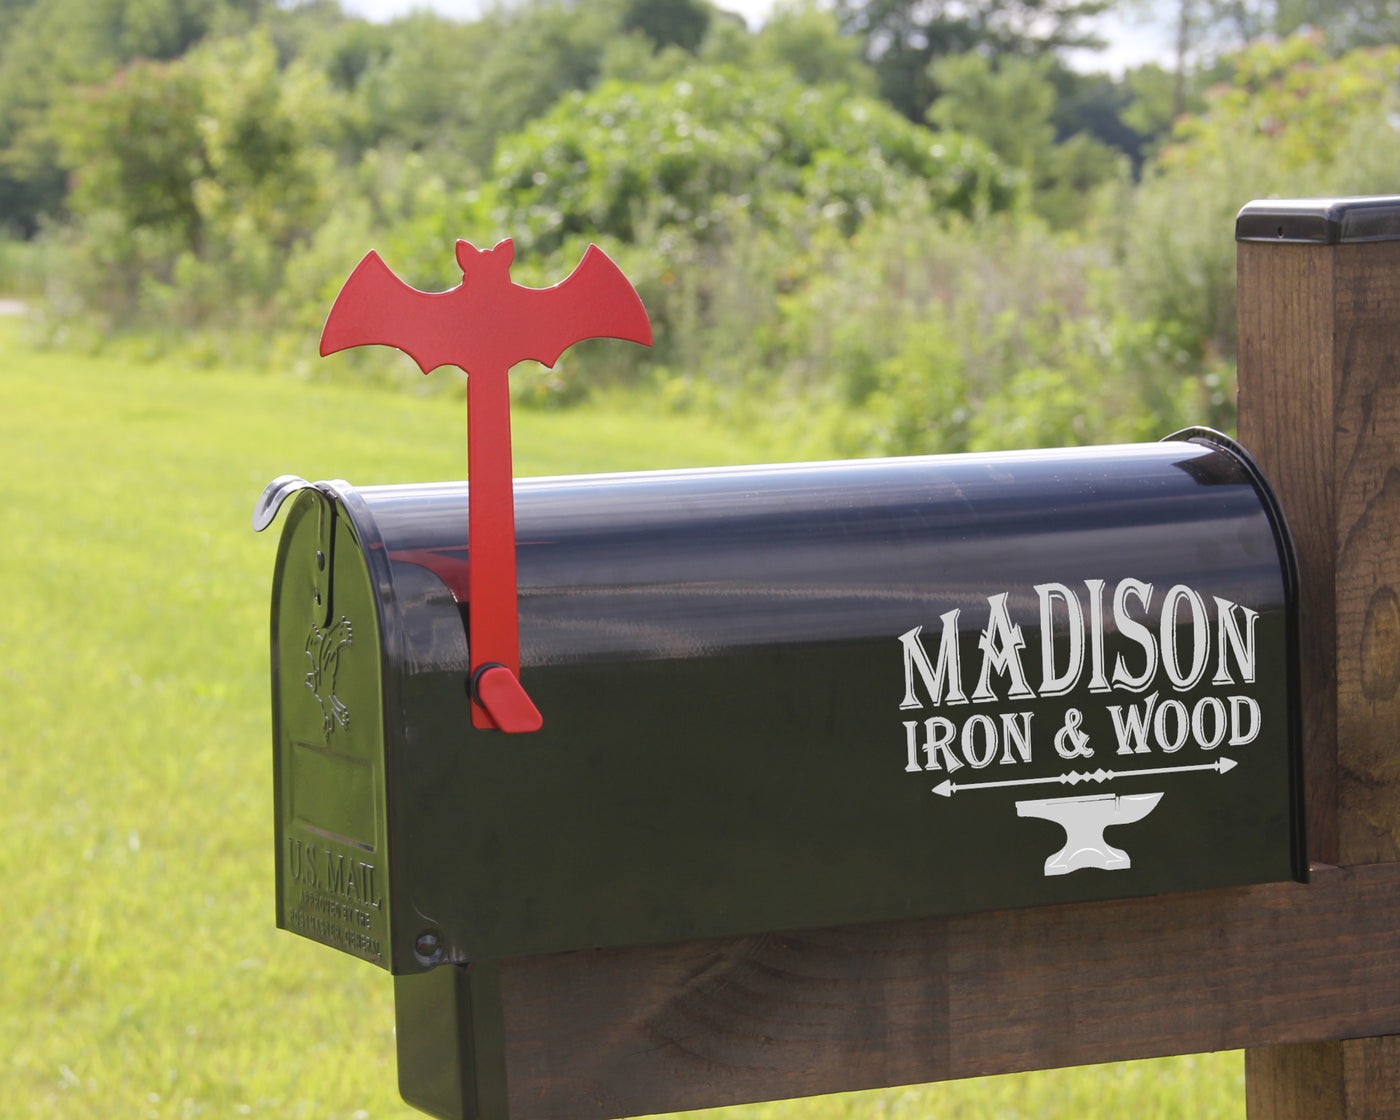 Bat Mailbox Flag - Madison Iron and Wood - Mailbox Post Decor - metal outdoor decor - Steel deocrations - american made products - veteran owned business products - fencing decorations - fencing supplies - custom wall decorations - personalized wall signs - steel - decorative post caps - steel post caps - metal post caps - brackets - structural brackets - home improvement - easter - easter decorations - easter gift - easter yard decor